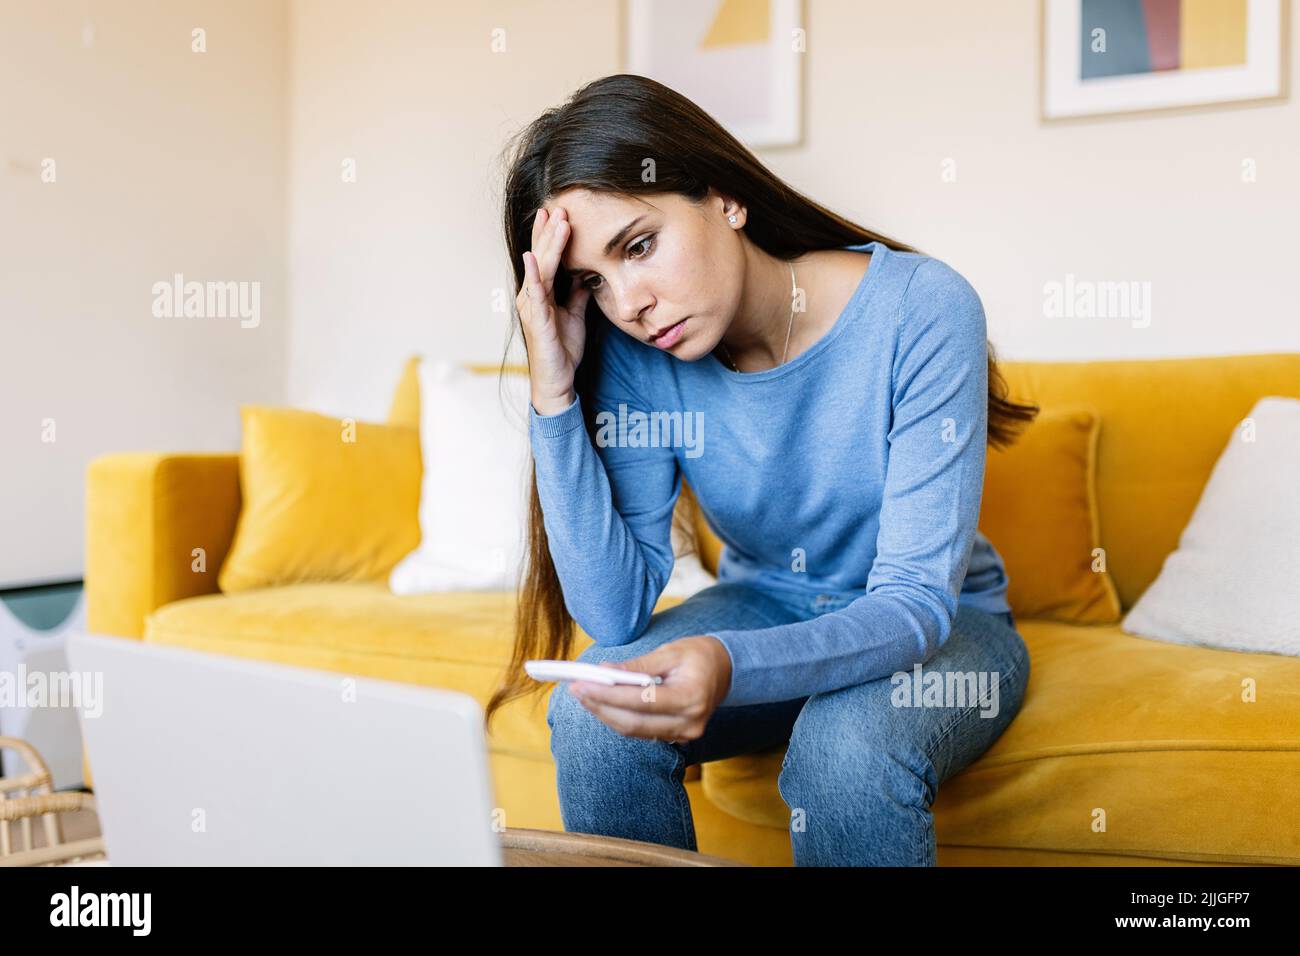 Sick woman having an online medical consultation with doctor at home Stock Photo